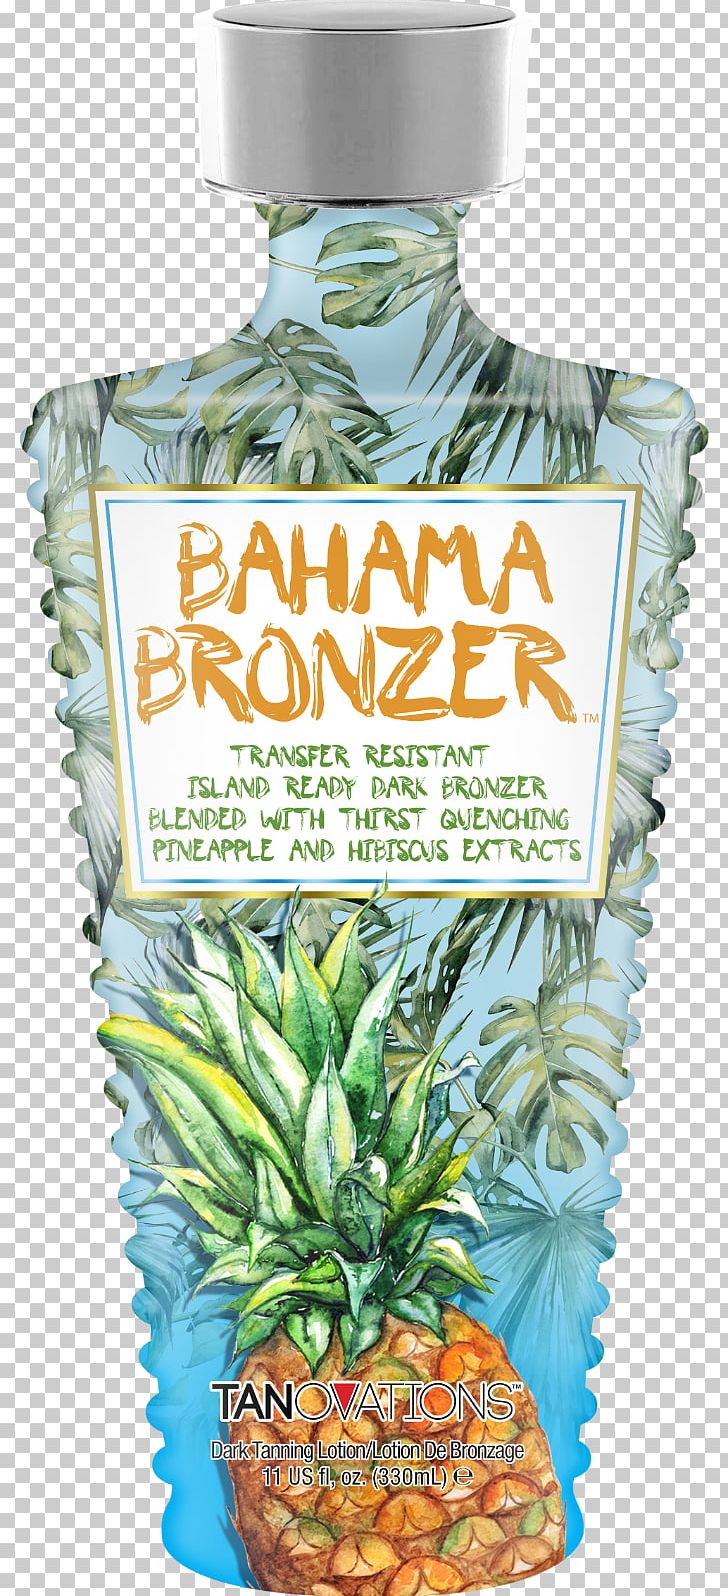 Indoor Tanning Lotion Sunscreen Sun Tanning PNG, Clipart, Ananas, Bahama, Bromeliaceae, Bronzer, Cosmetics Free PNG Download